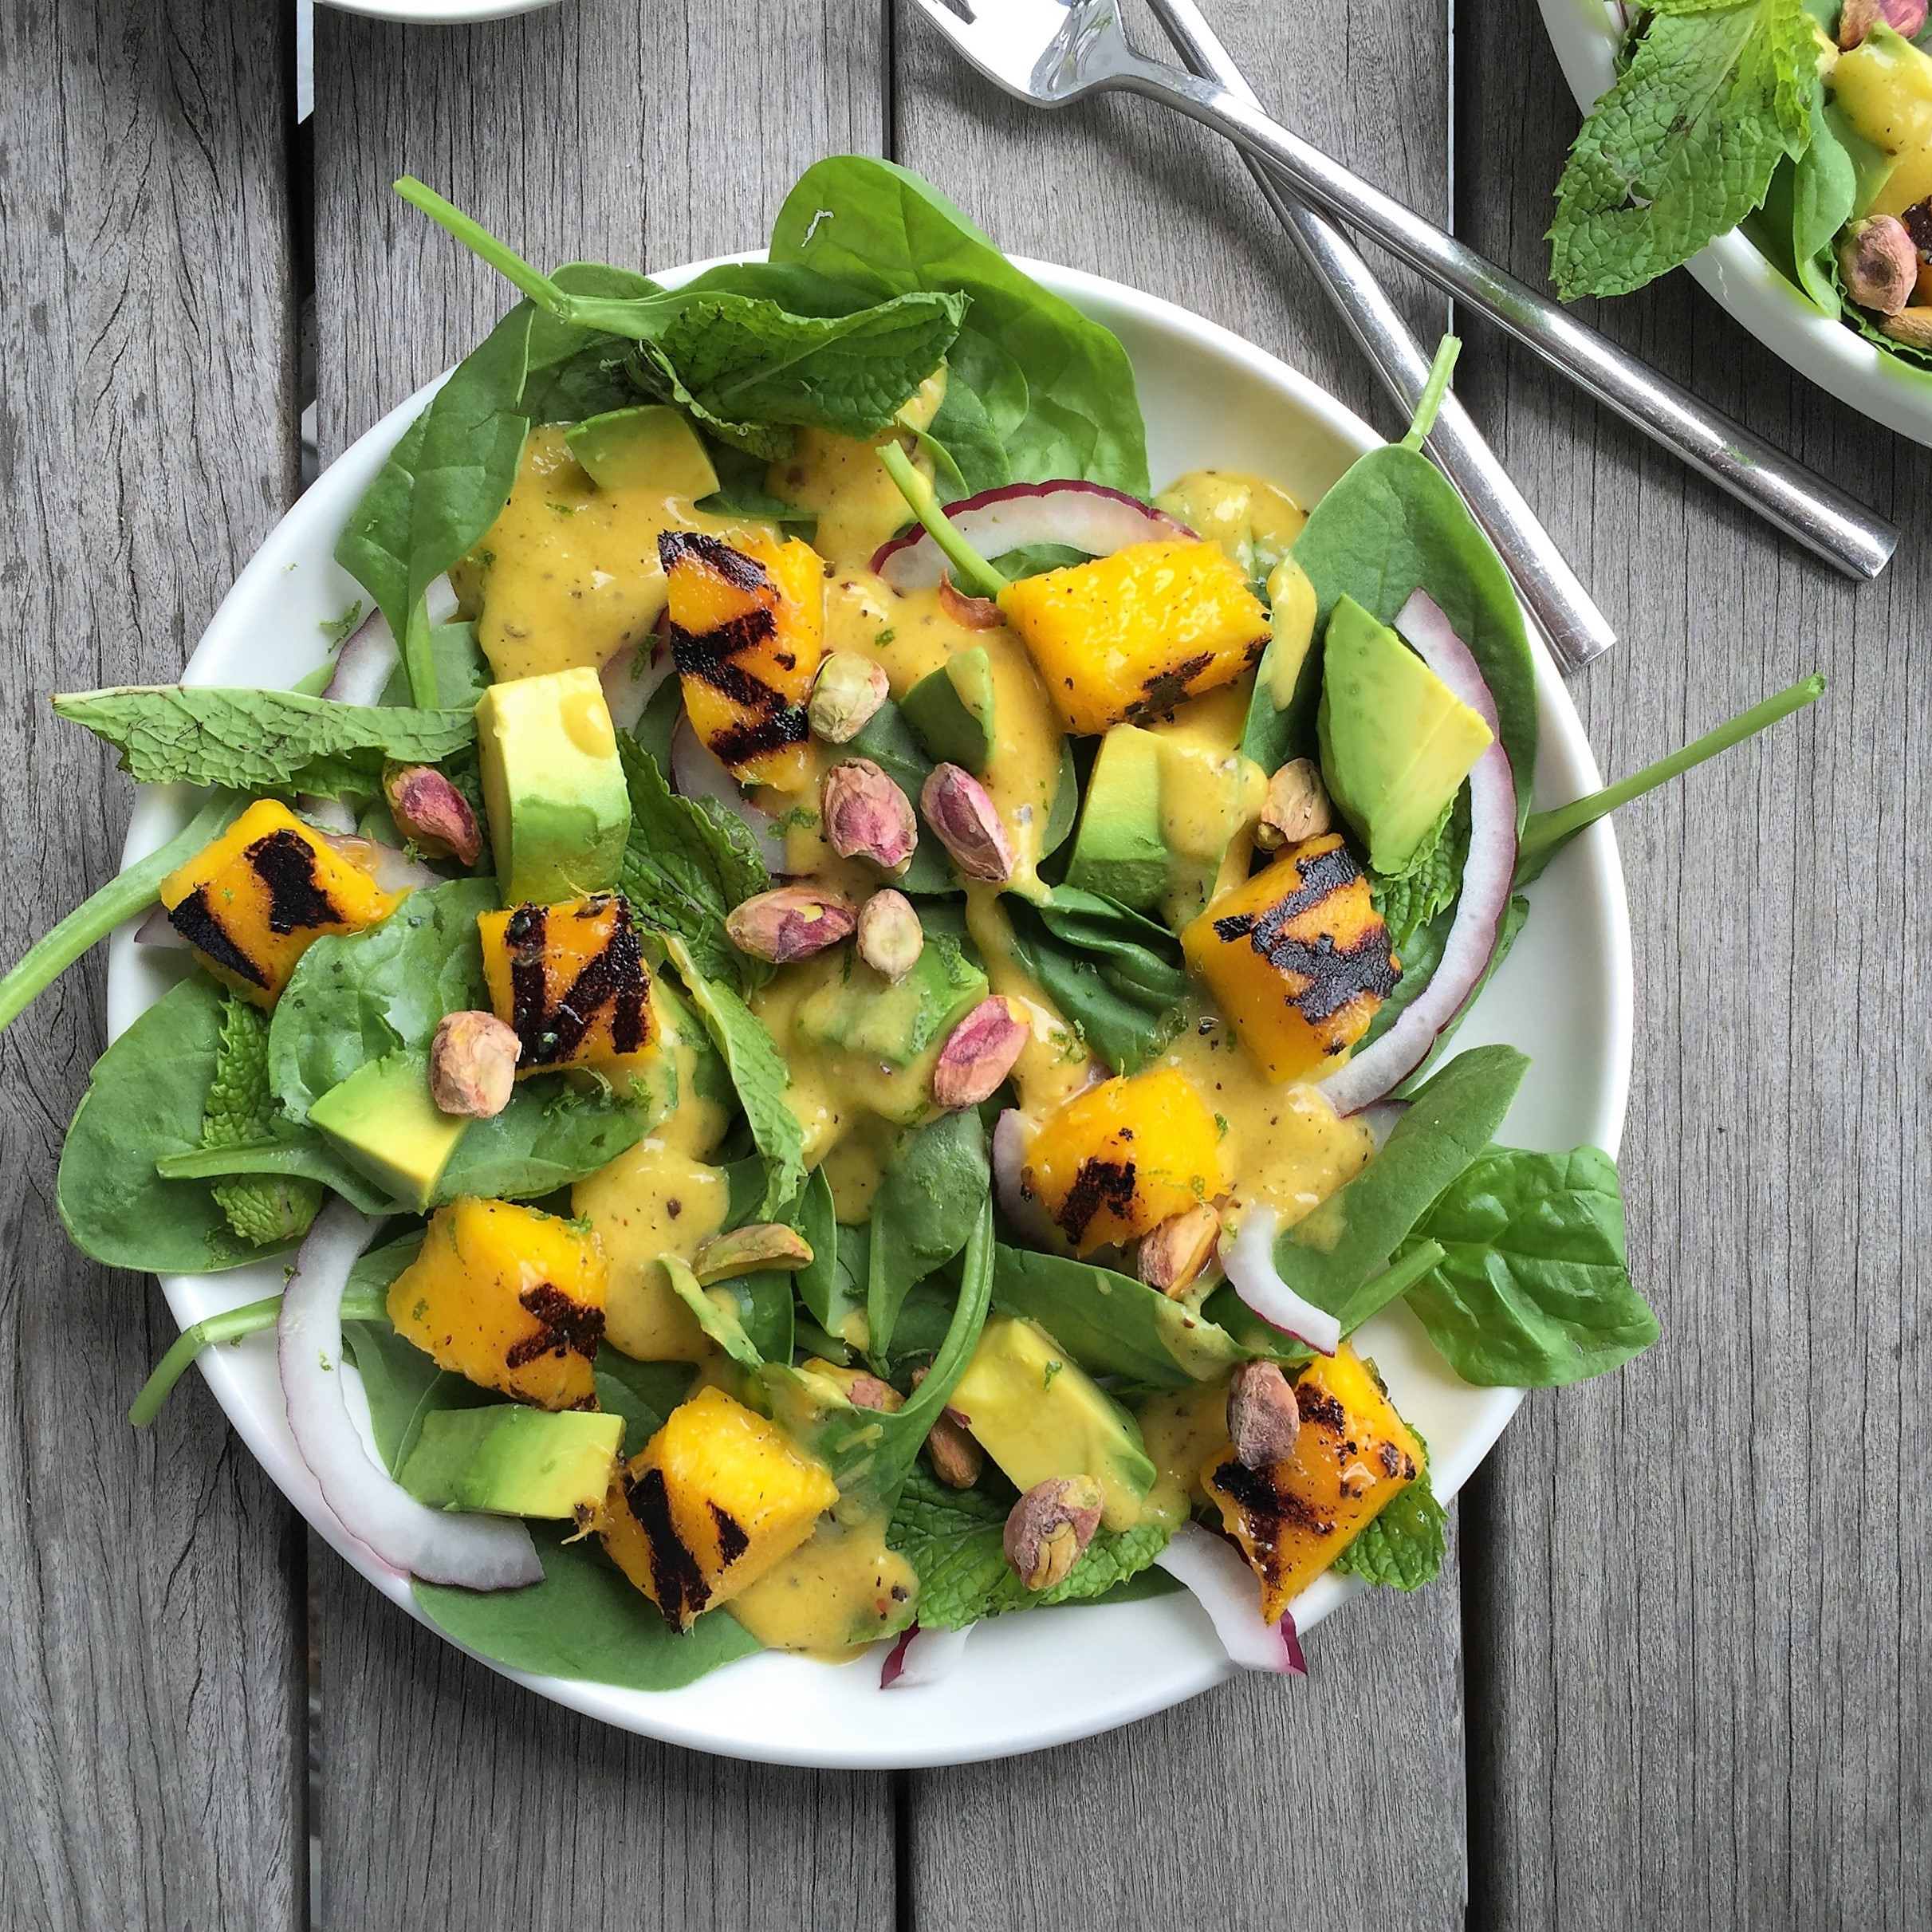 grilled mango and spinach salad with avocado | Jackie Newgent